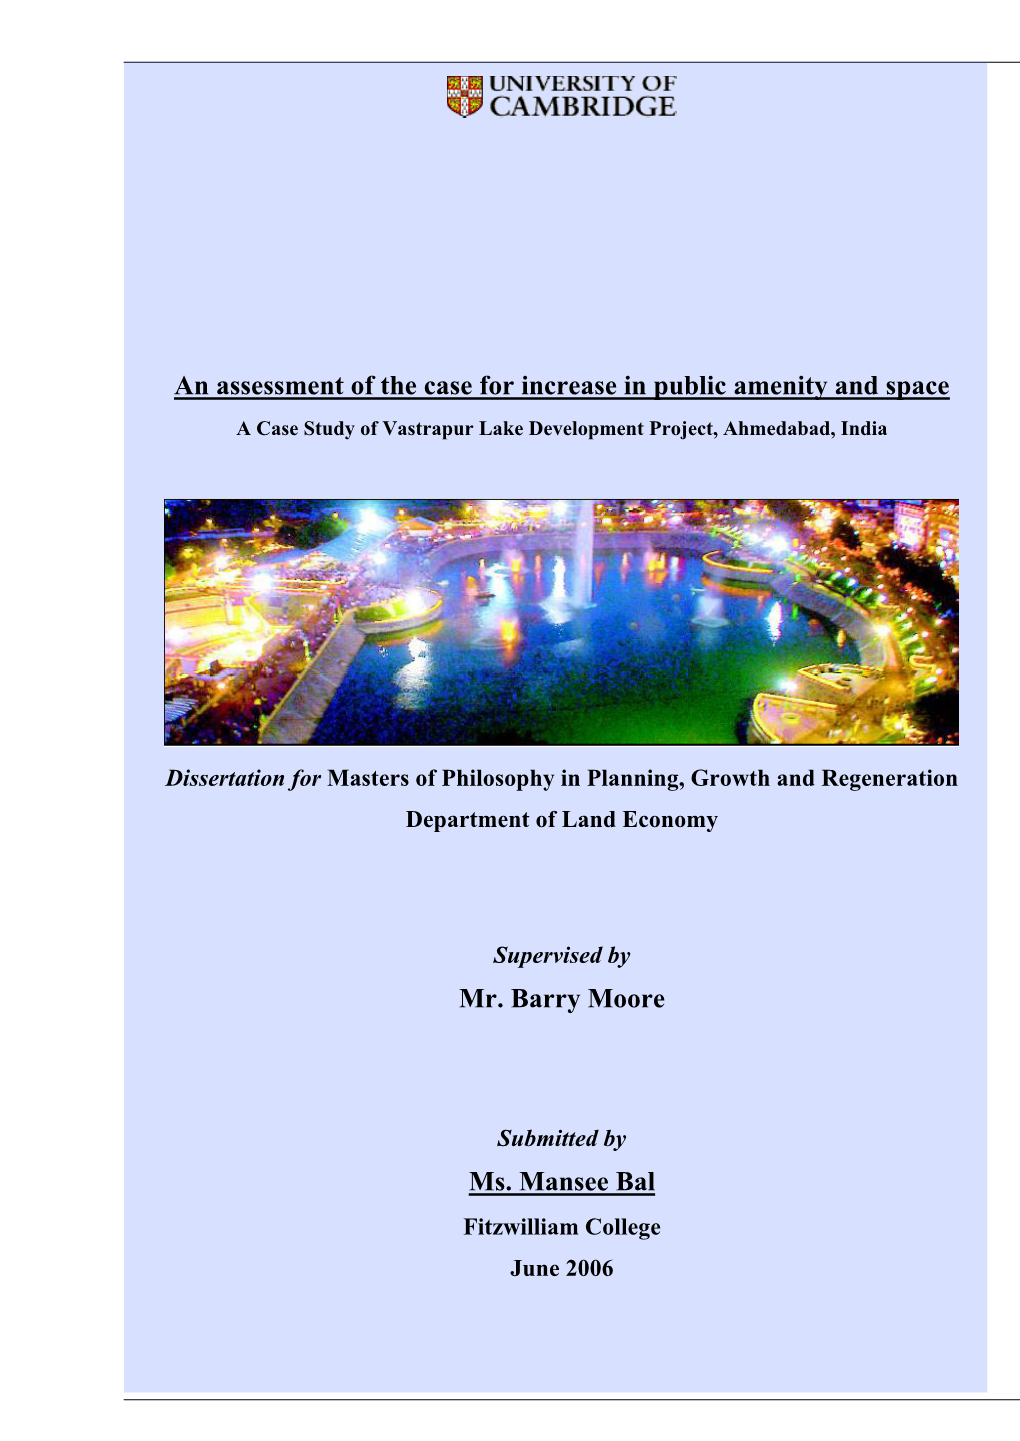 An Assessment of the Case for Increase in Public Amenity and Space a Case Study of Vastrapur Lake Development Project, Ahmedabad, India